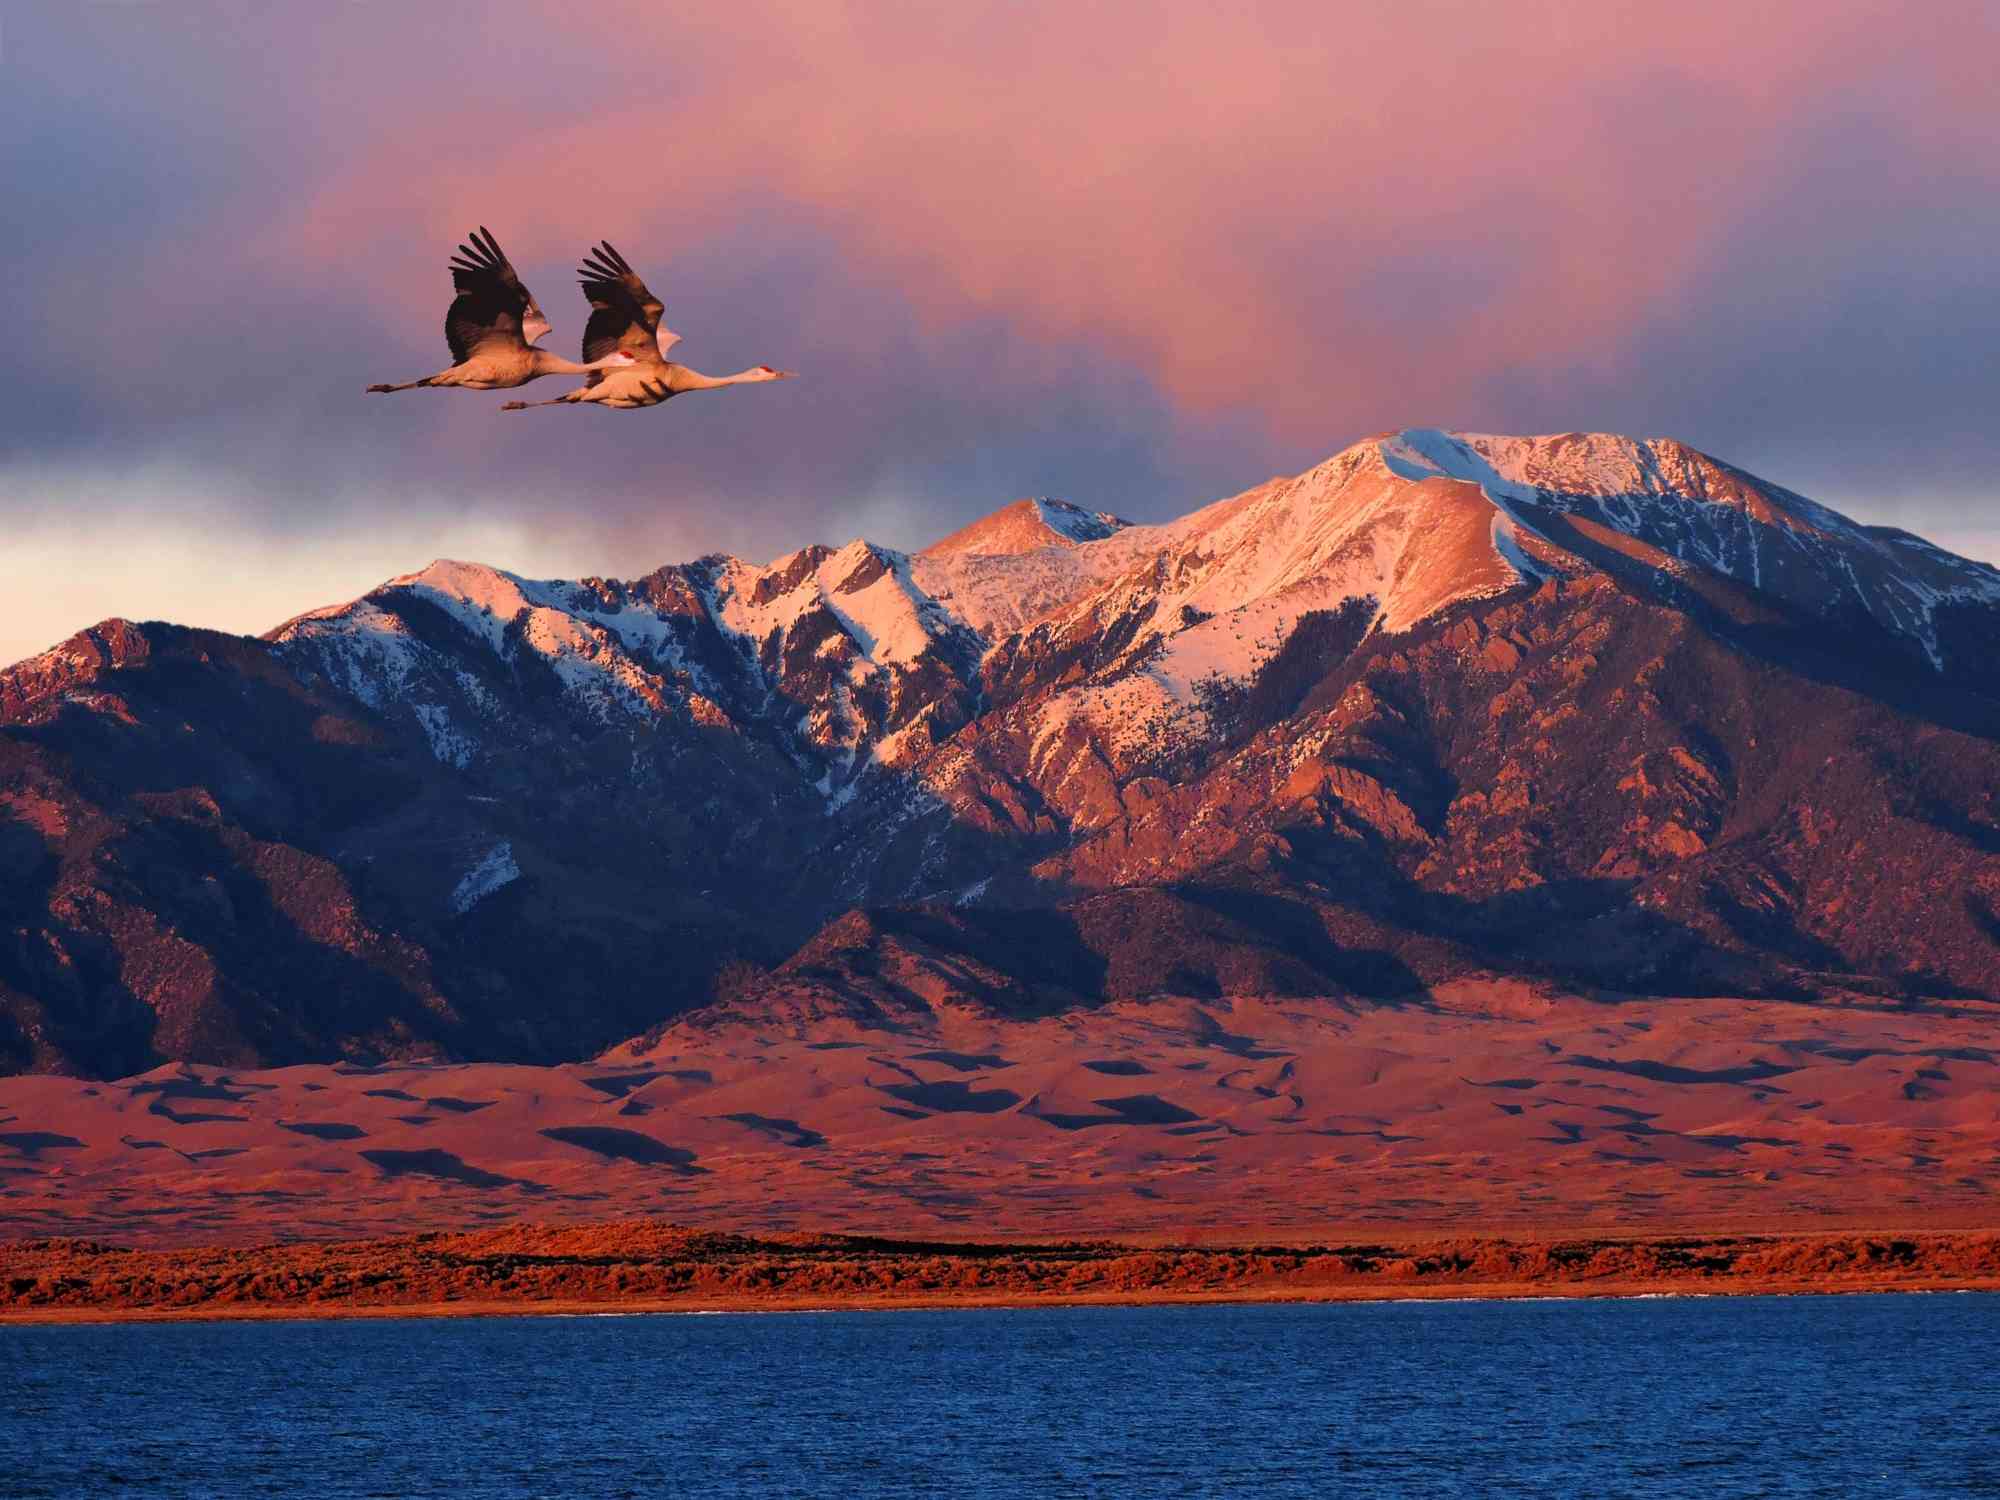 Pair of sandhill cranes flying above Great Sand Dunes National Park